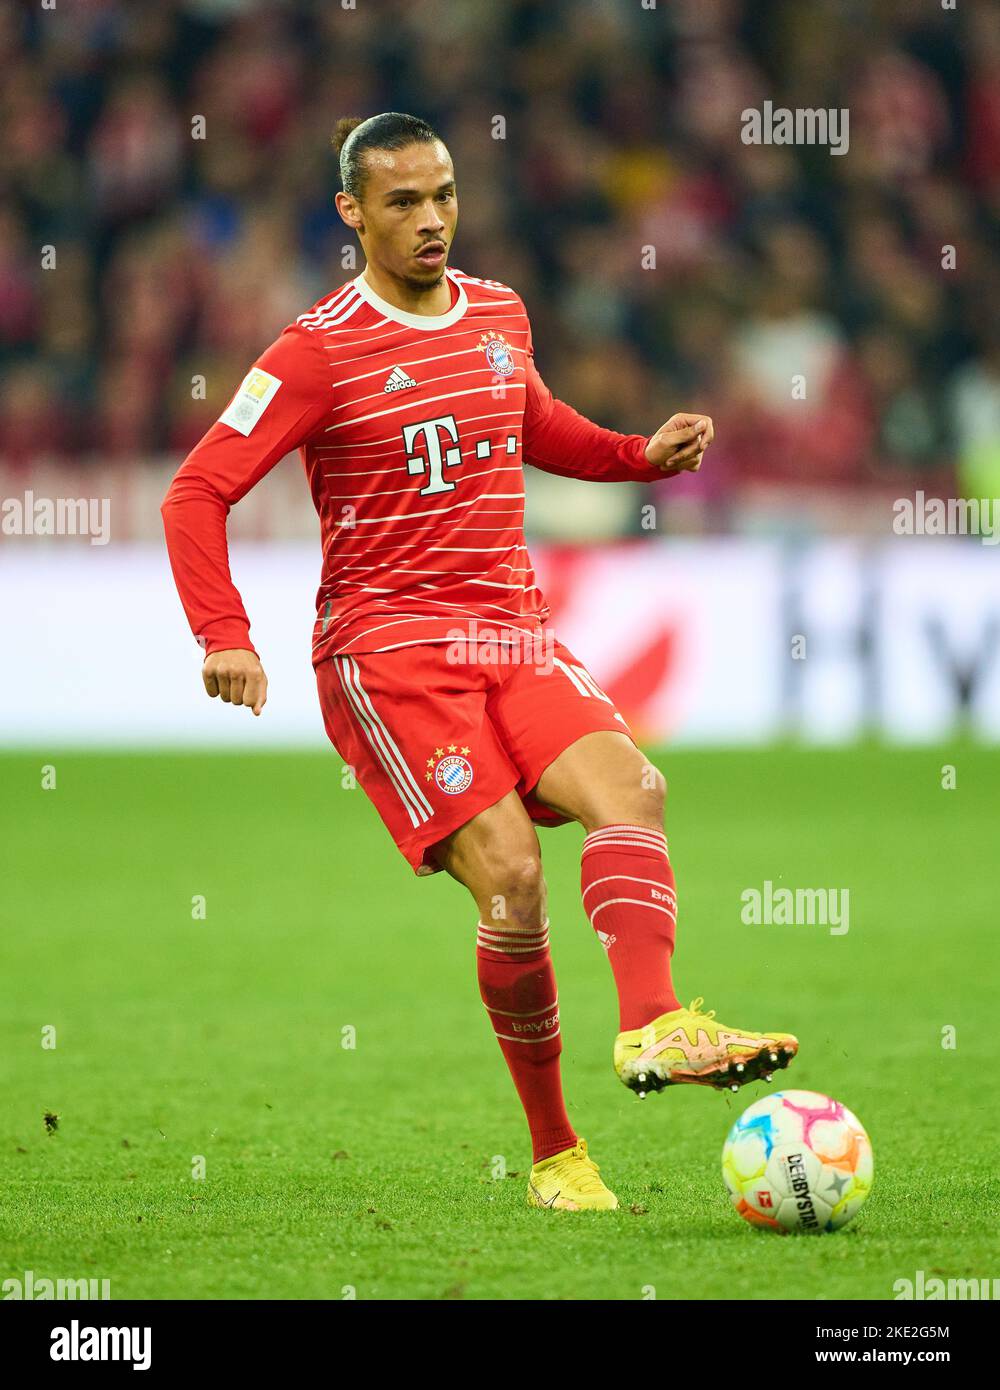 Leroy SANE, FCB 10   in the match FC BAYERN MÜNCHEN - SV WERDER BREMEN 6-1 1.German Football League on Nov 8, 2022 in Munich, Germany. Season 2022/2023, matchday 14, 1.Bundesliga, FCB, München, 14.Spieltag © Peter Schatz / Alamy Live News    - DFL REGULATIONS PROHIBIT ANY USE OF PHOTOGRAPHS as IMAGE SEQUENCES and/or QUASI-VIDEO - Stock Photo